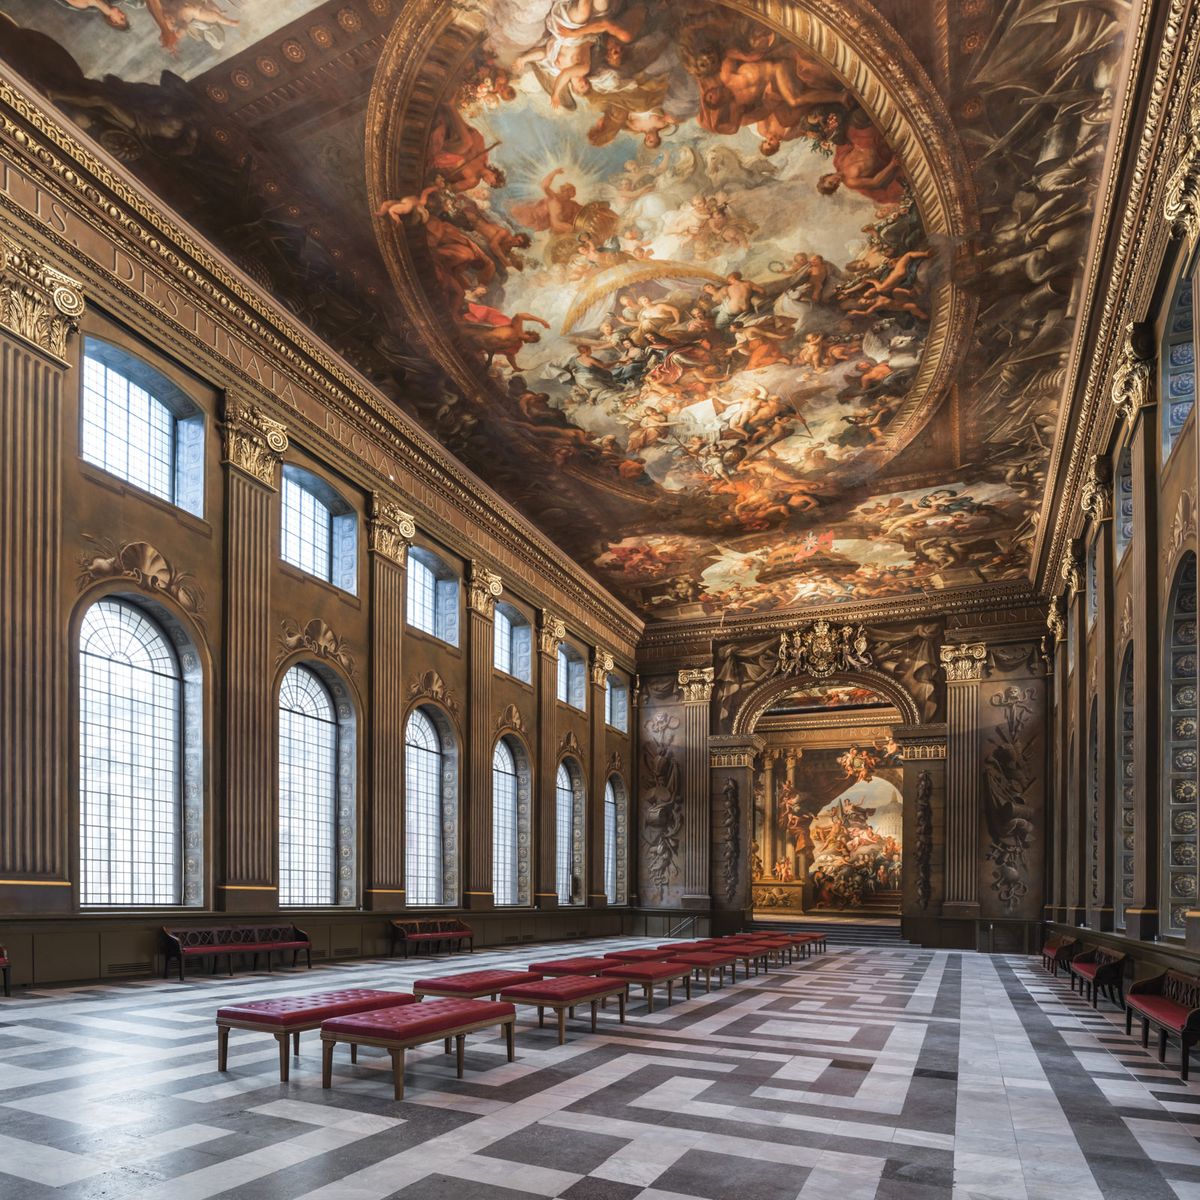 Lie back and think of Nelson, whose body lay in state in the Painted Hall after his victory and death at the Battle of Trafalgar Photo: Nikhilesh Haval